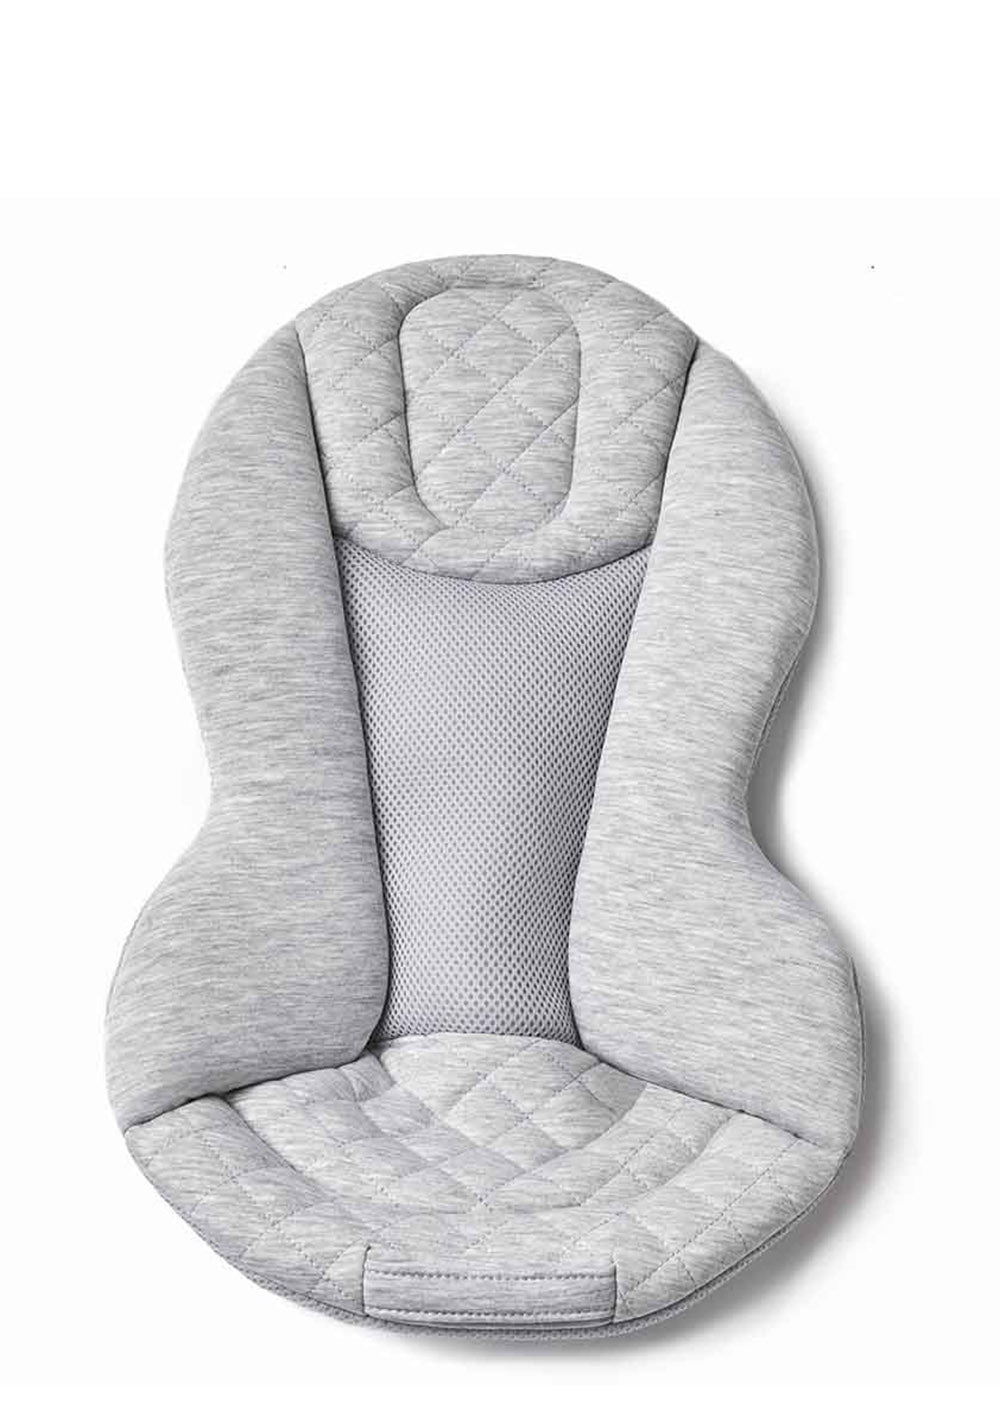 'Evolve' 3-in-1 Babywippe light grey